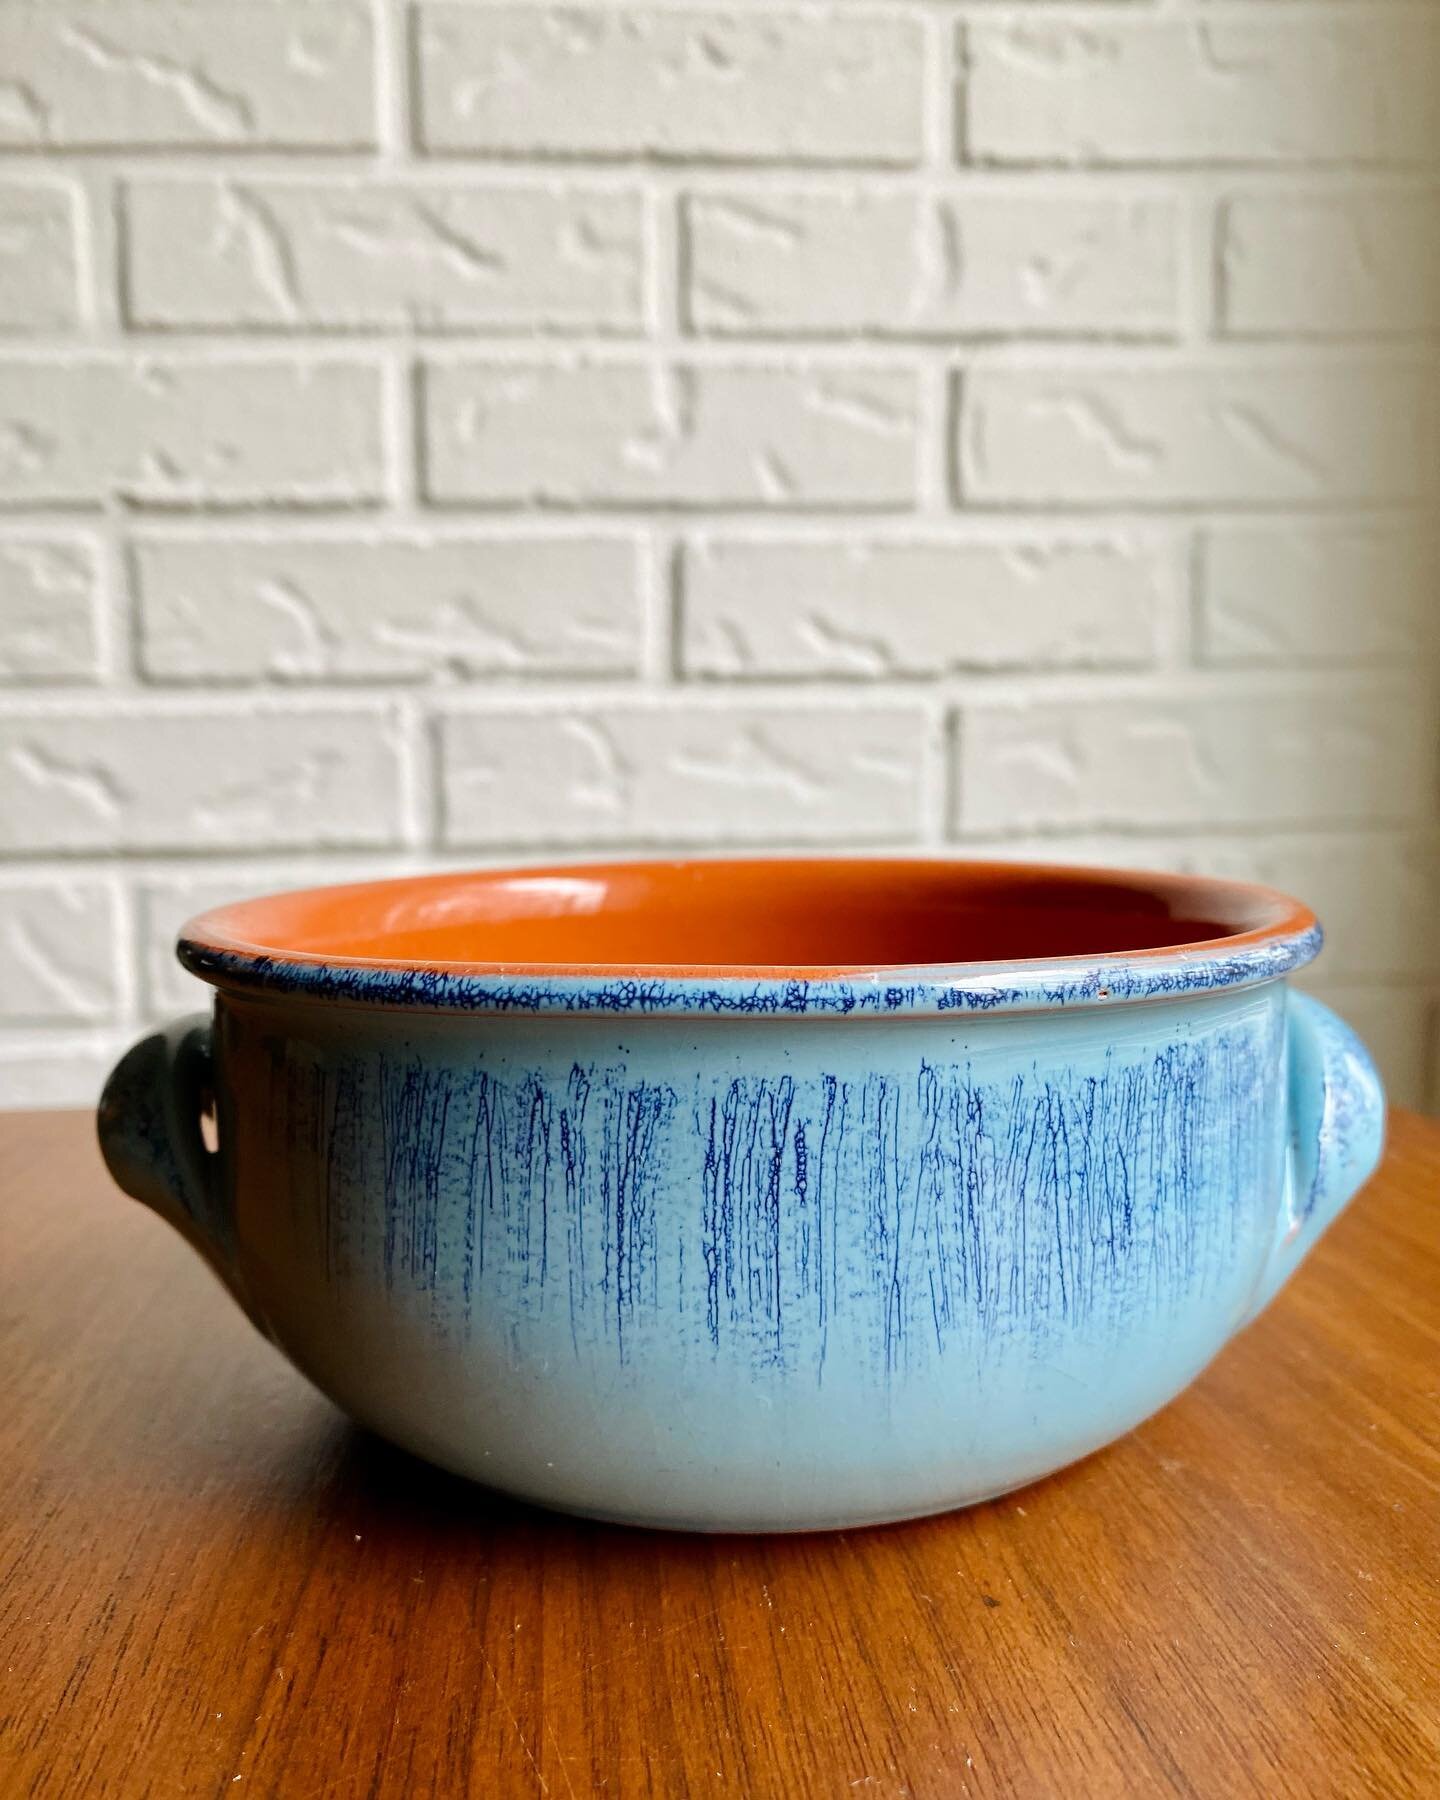 💙FOR SALE:🧡
I had originally had two of these gorgeous clay bowls, and I sold one a year or two ago. I kept one for myself because I love this blue so much. But now I&rsquo;m turning into a hoarder of beautiful, blue pottery, so I am wondering if m